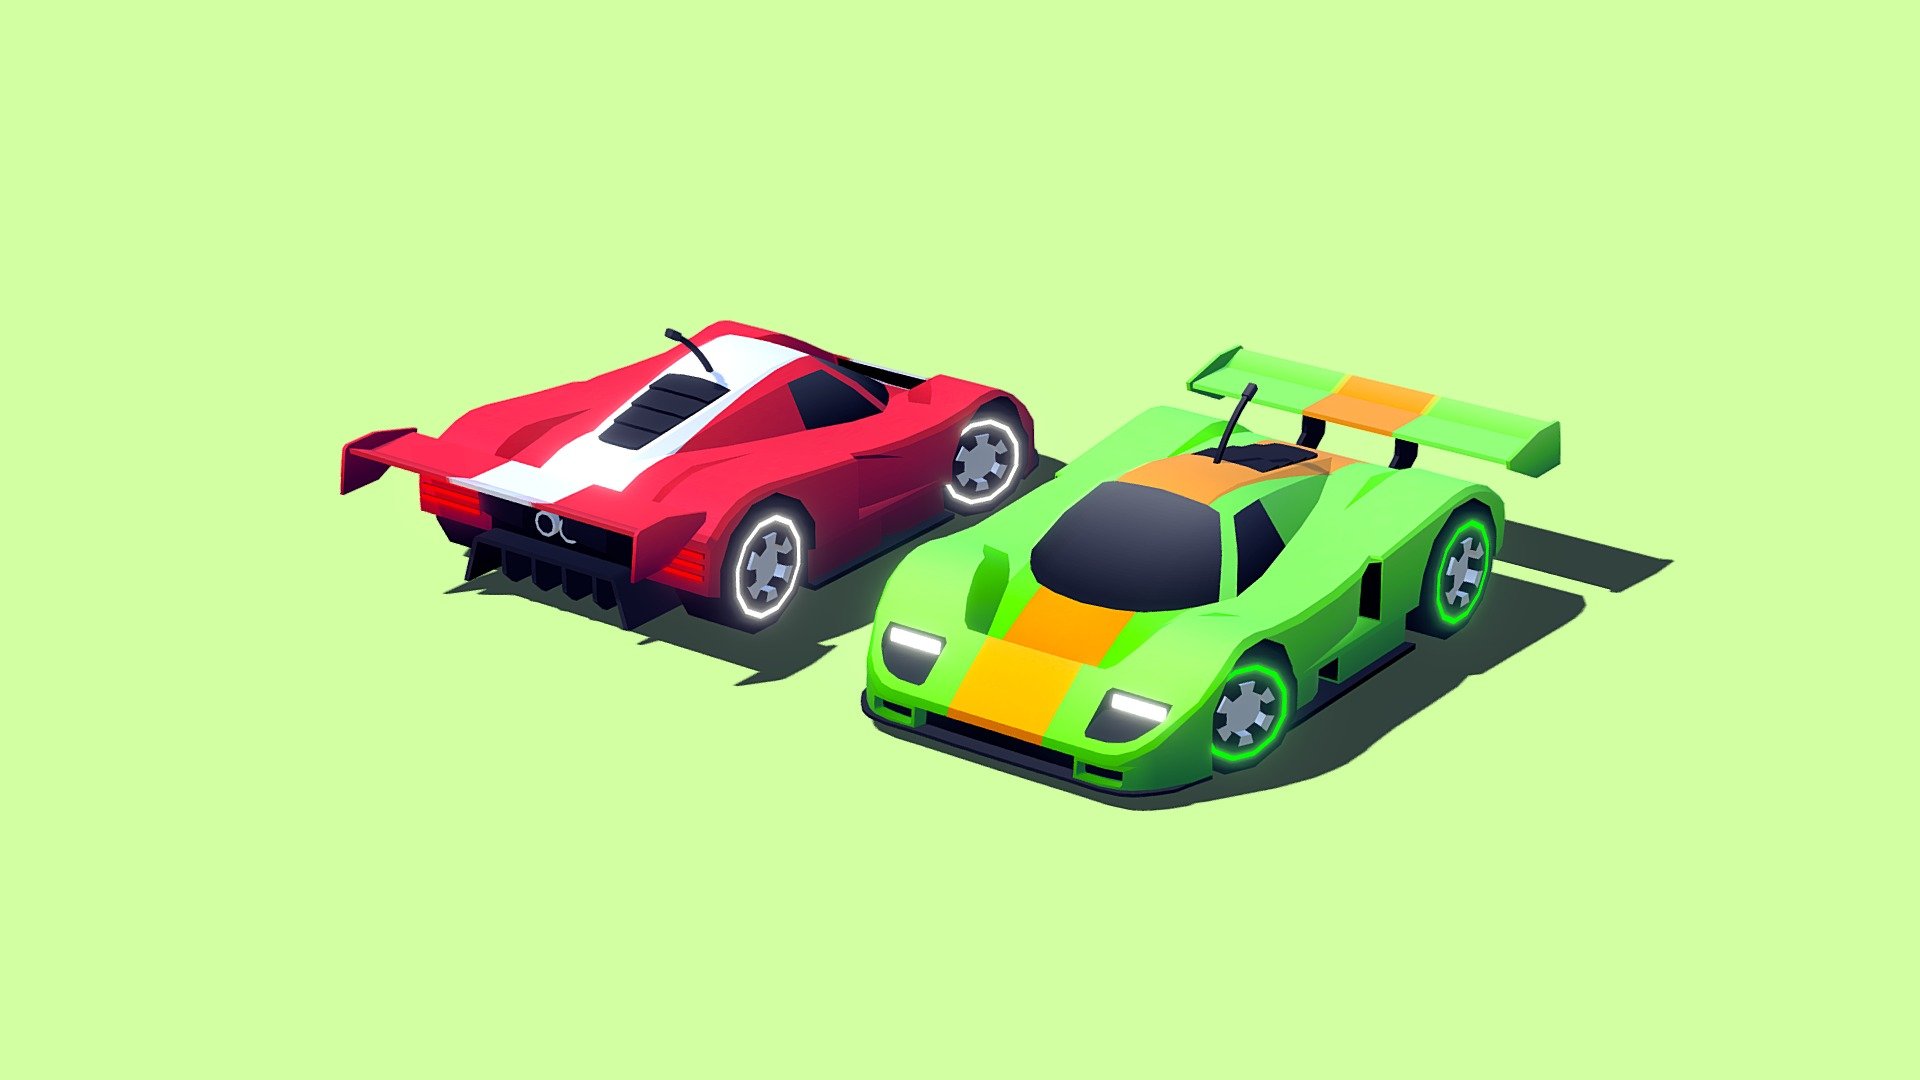 This is “Deep-Impact”, the 2nd vehicle that is going to be added in TURBO: Cartoon Racing Cars. This update will be dropped on both Unity and Sketchfab very soon!.

I hope you like it.

P.S.: I apologize for the delay in the 2022.2 update of ARCADE: Ultimate Vehicles Pack. I have sent this update since the 30th of January, but Unity has not approved it yet. As a consequence, I cannot make the update on Sketchfab yet. Thank you for your patience.

Best regards, Mena 3d model